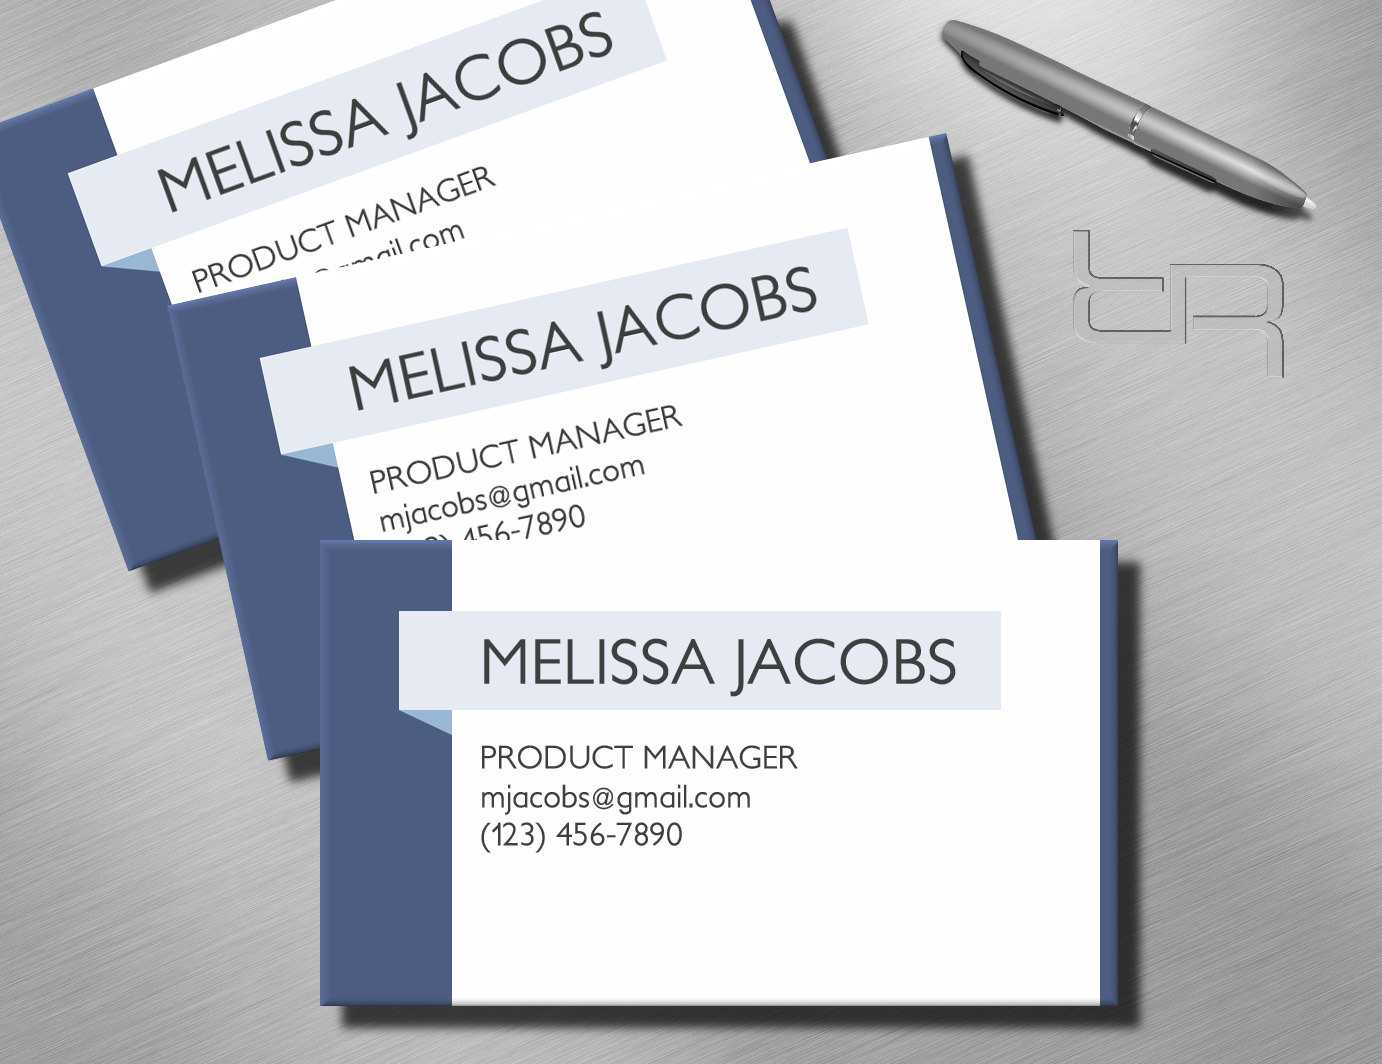 Southworth Business Card Template ] - Printingforless Com Inside Southworth Business Card Template